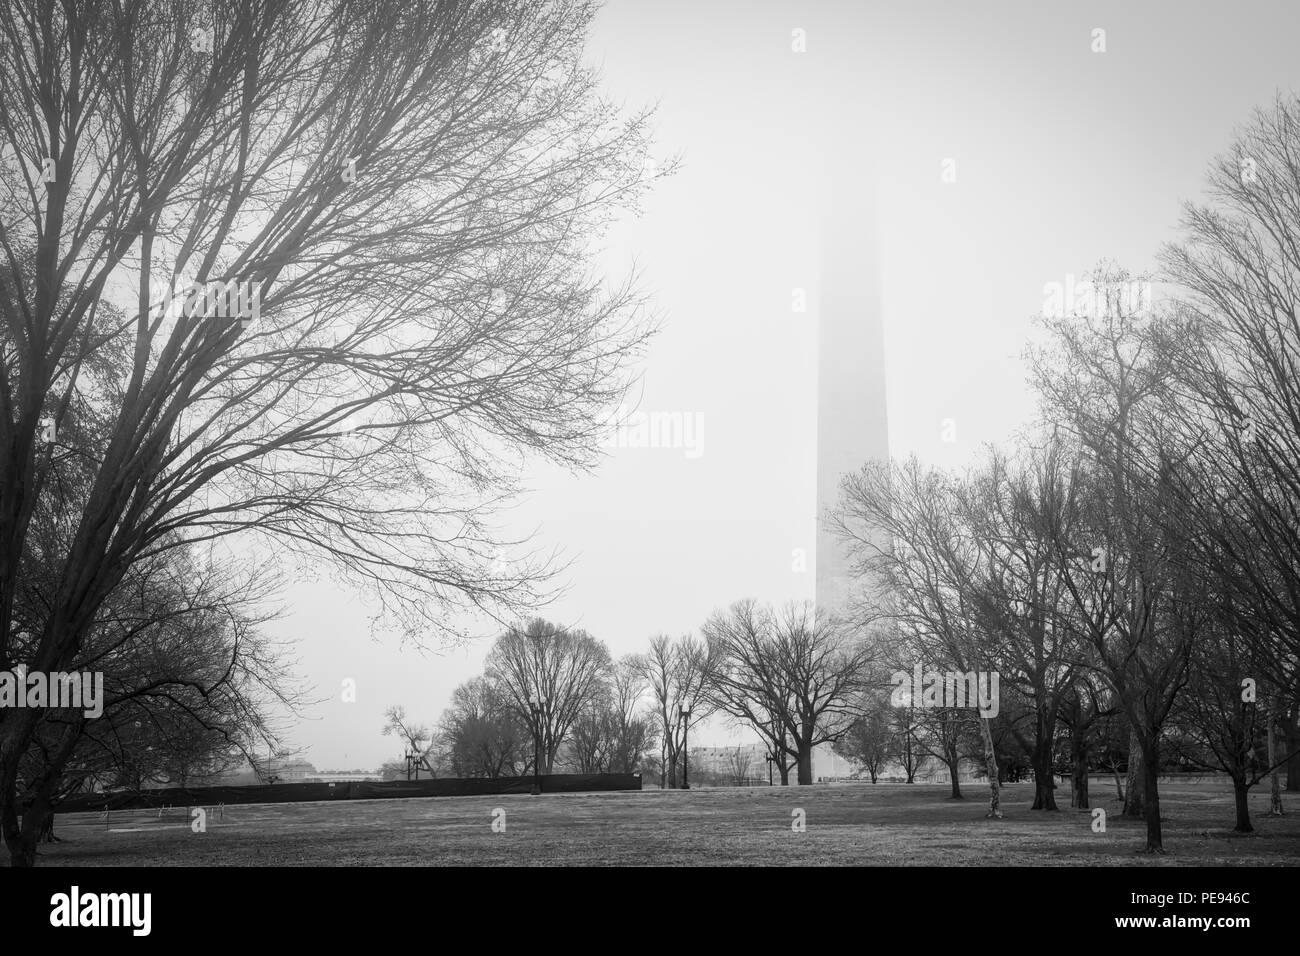 A foggy day near the Washington Monument in DC. Stock Photo